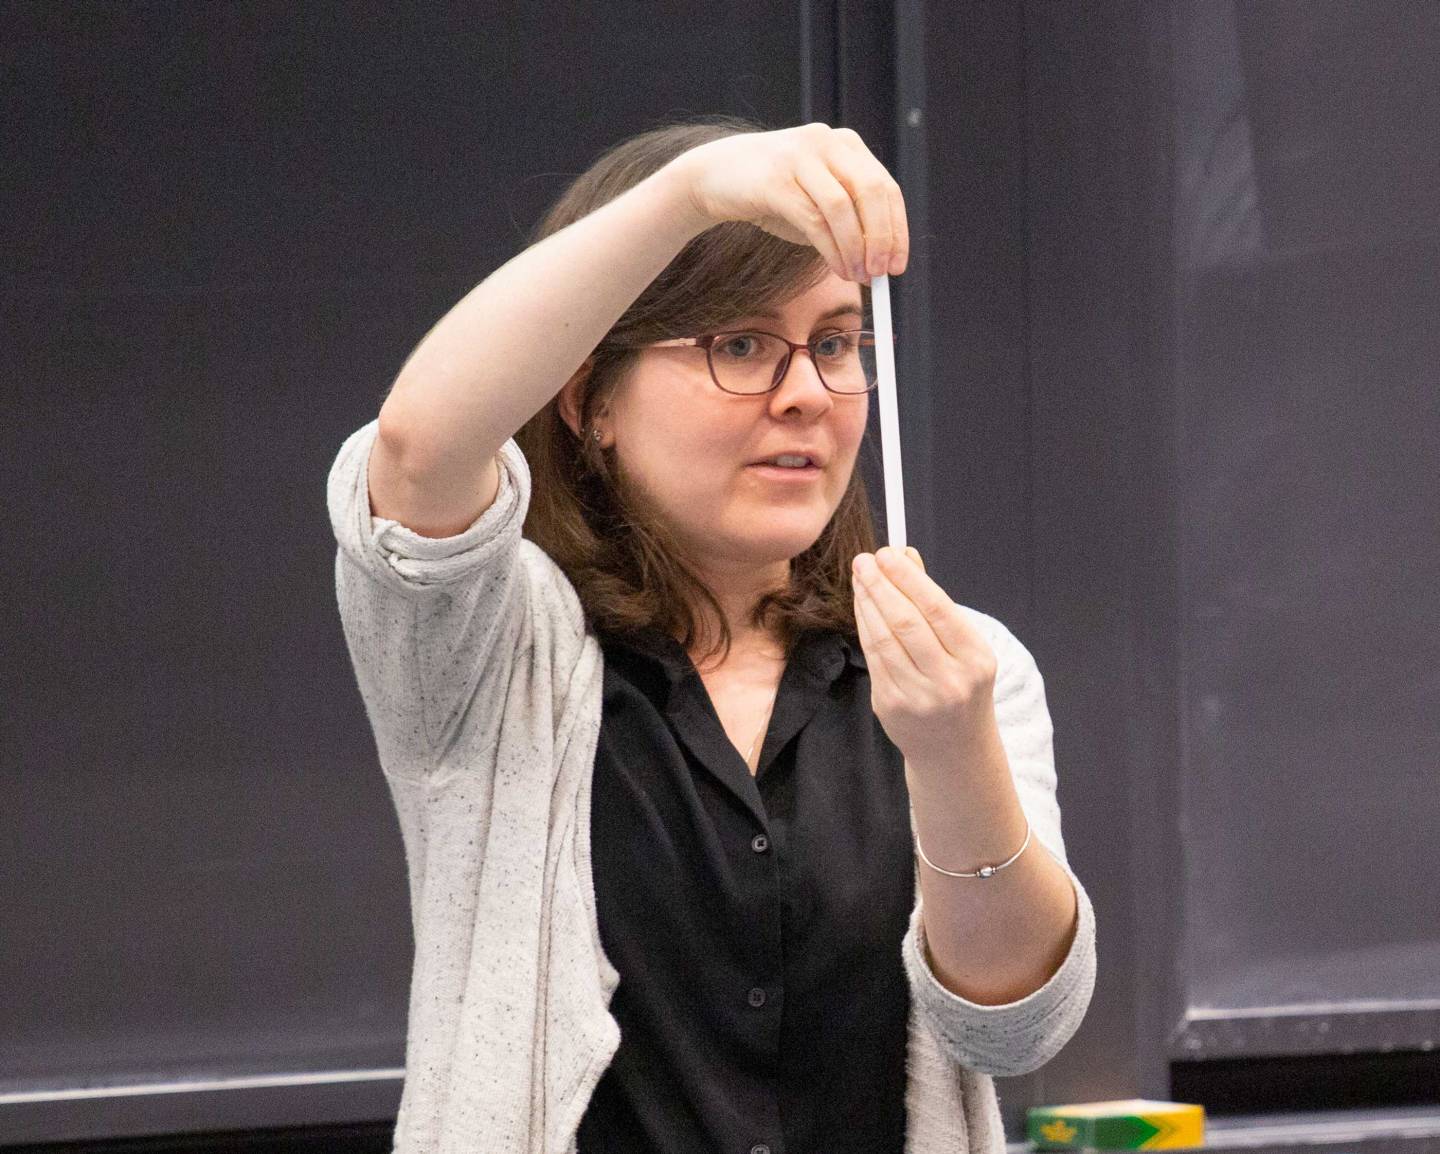 Prof. Marissa Weichman demonstrates a concept during a lecture